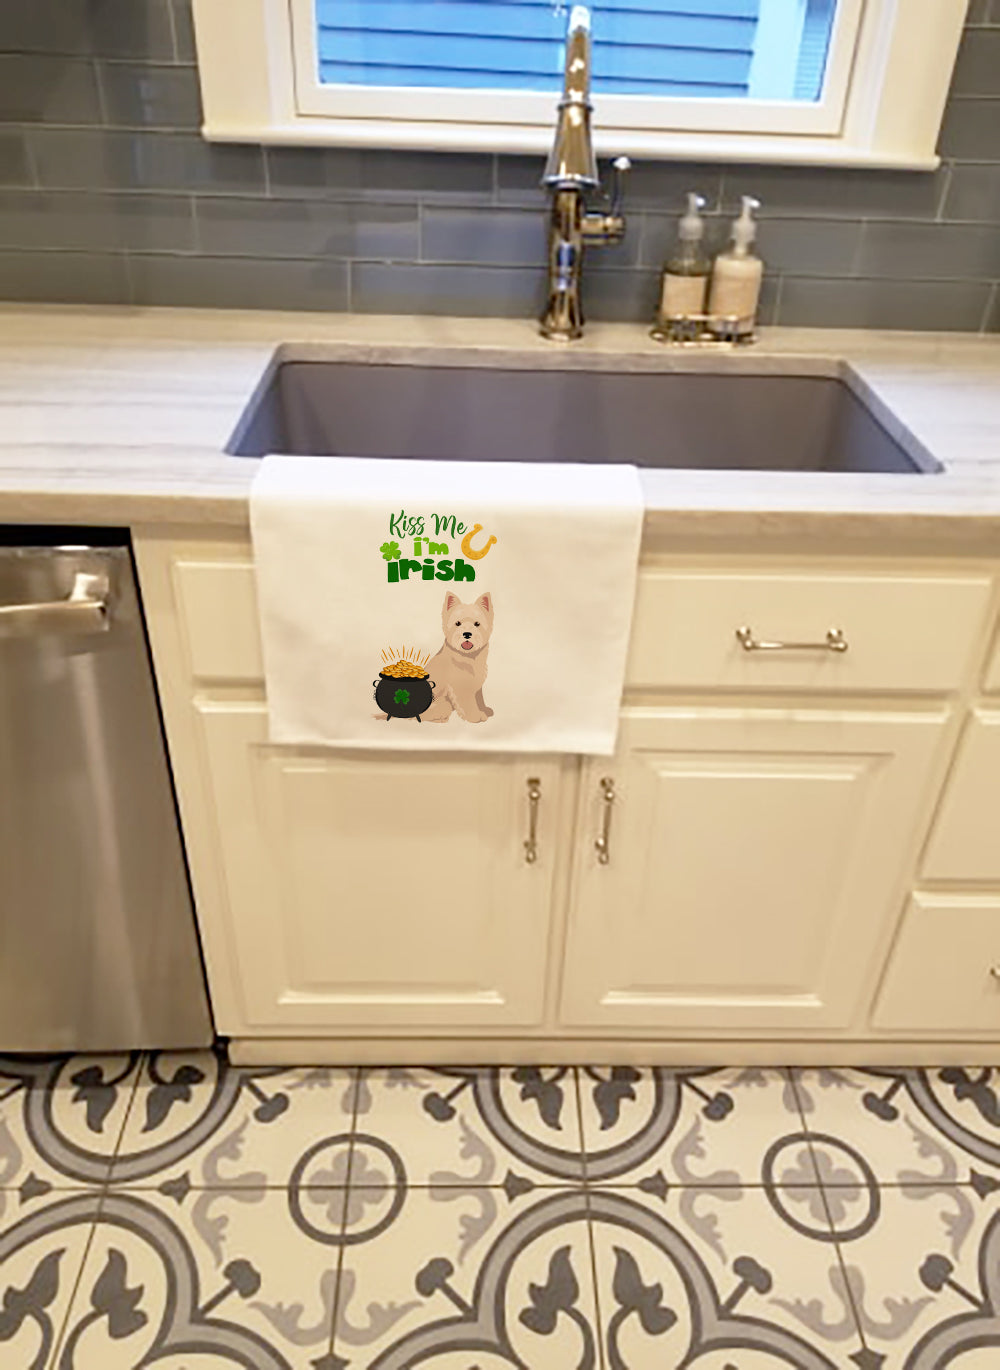 Buy this Westie West Highland White Terrier St. Patrick's Day White Kitchen Towel Set of 2 Dish Towels